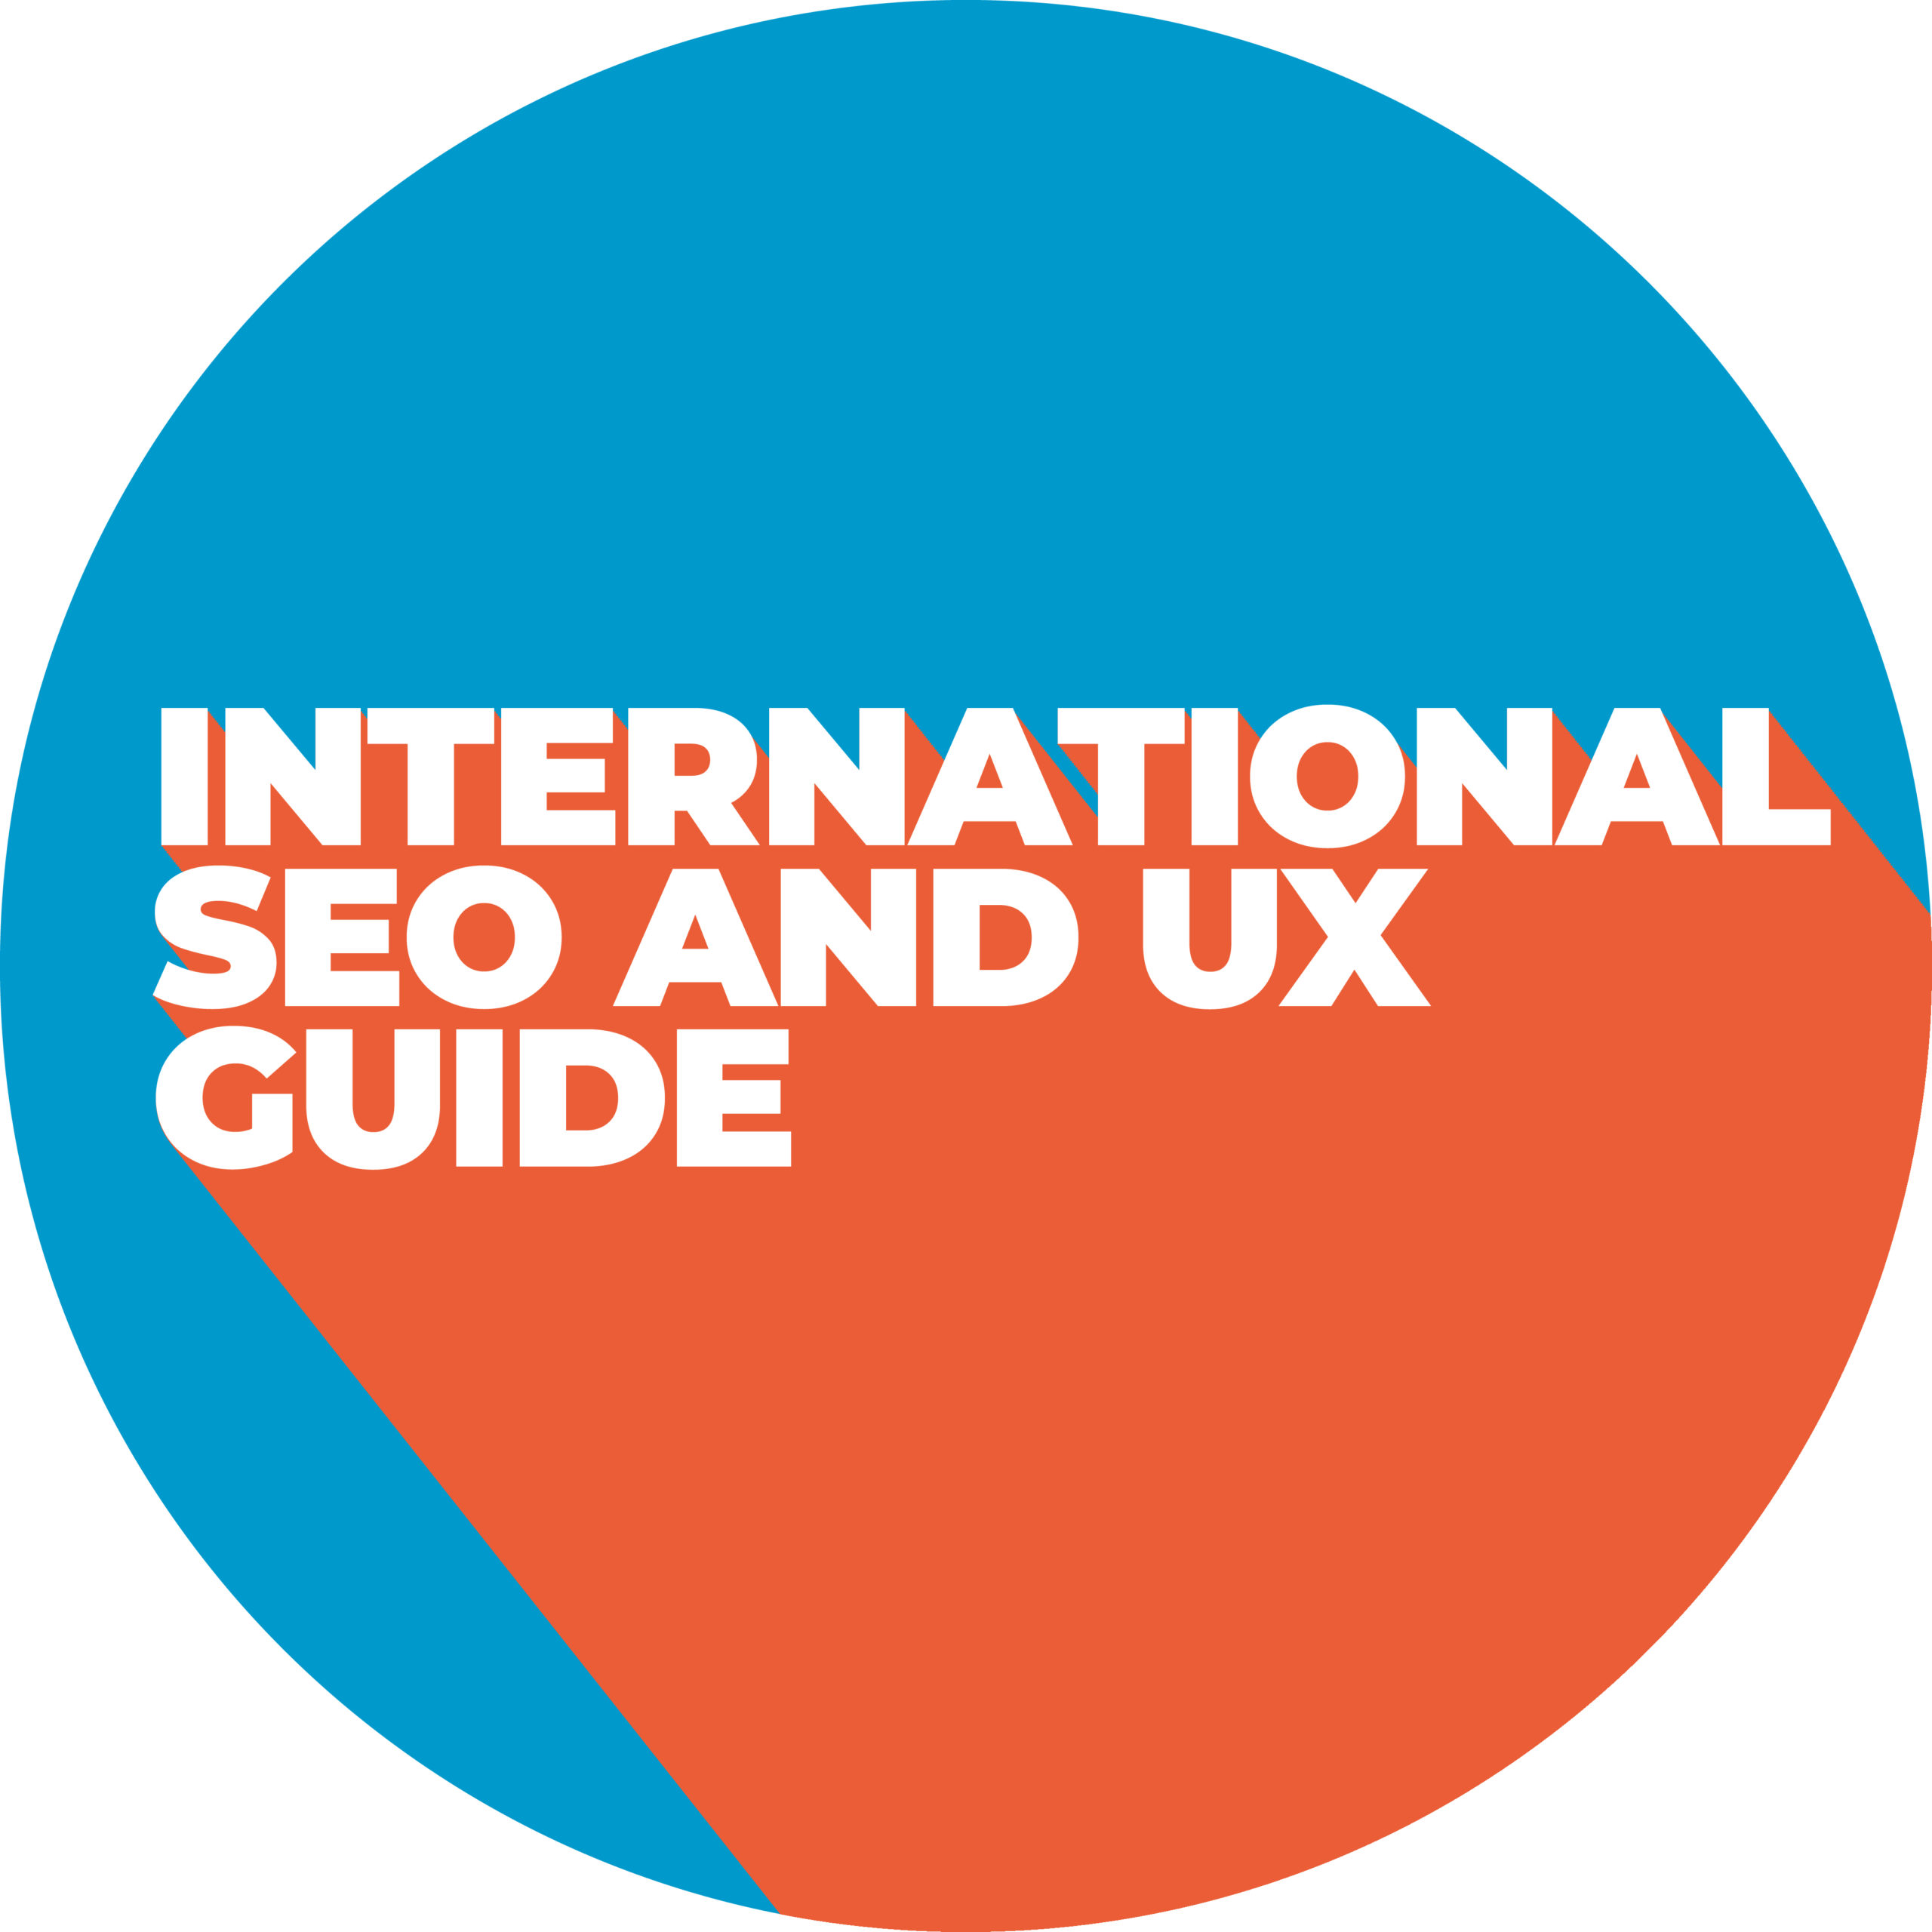 International SEO and UX Guide